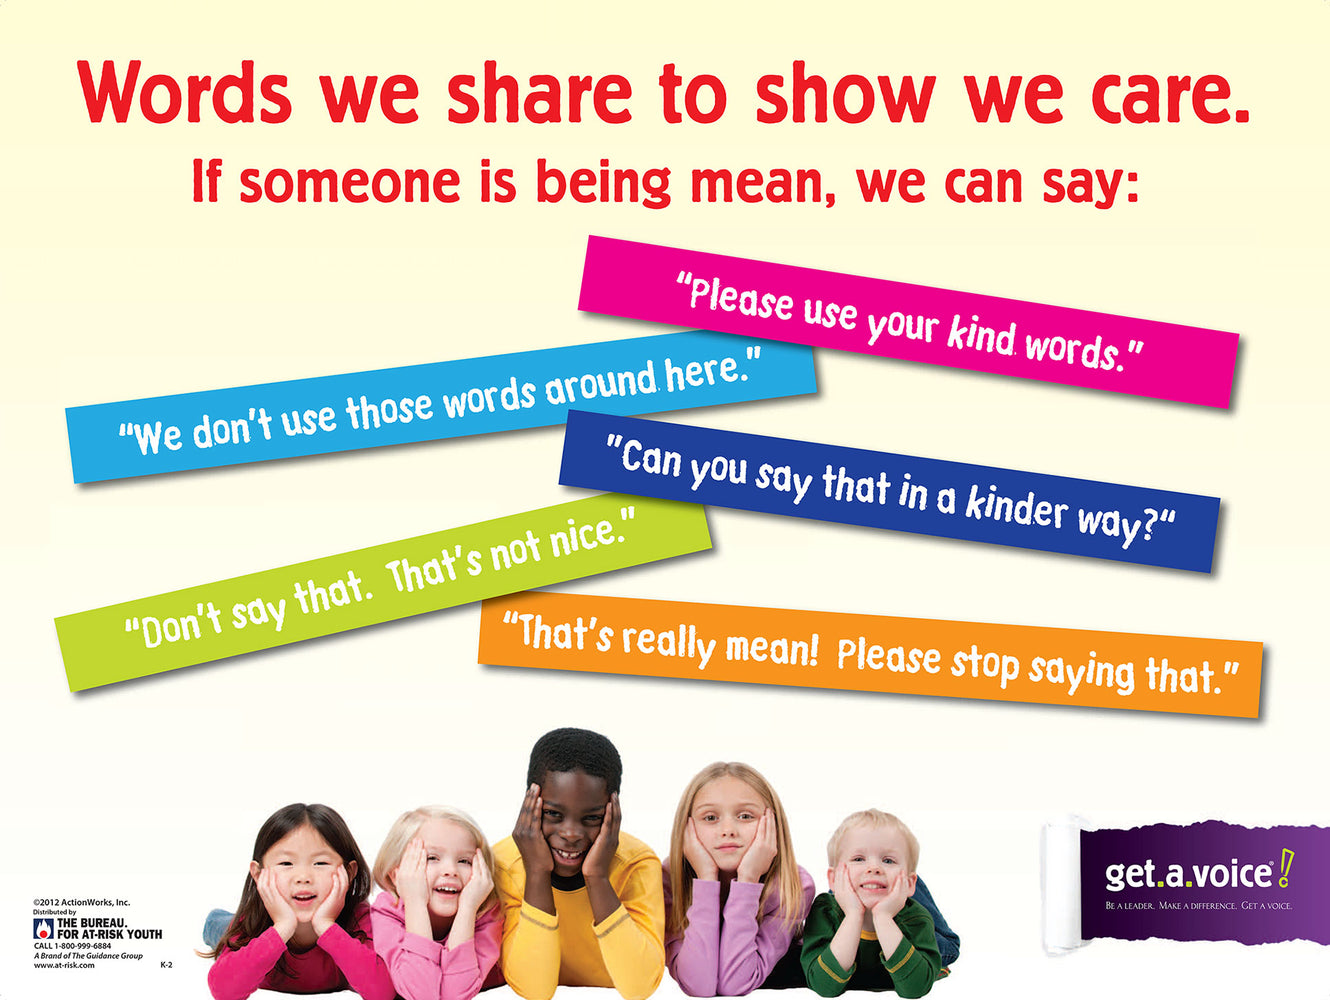 Get.A.Voice! (Grades K-2) Bullying Prevention "Words We Share" Poster